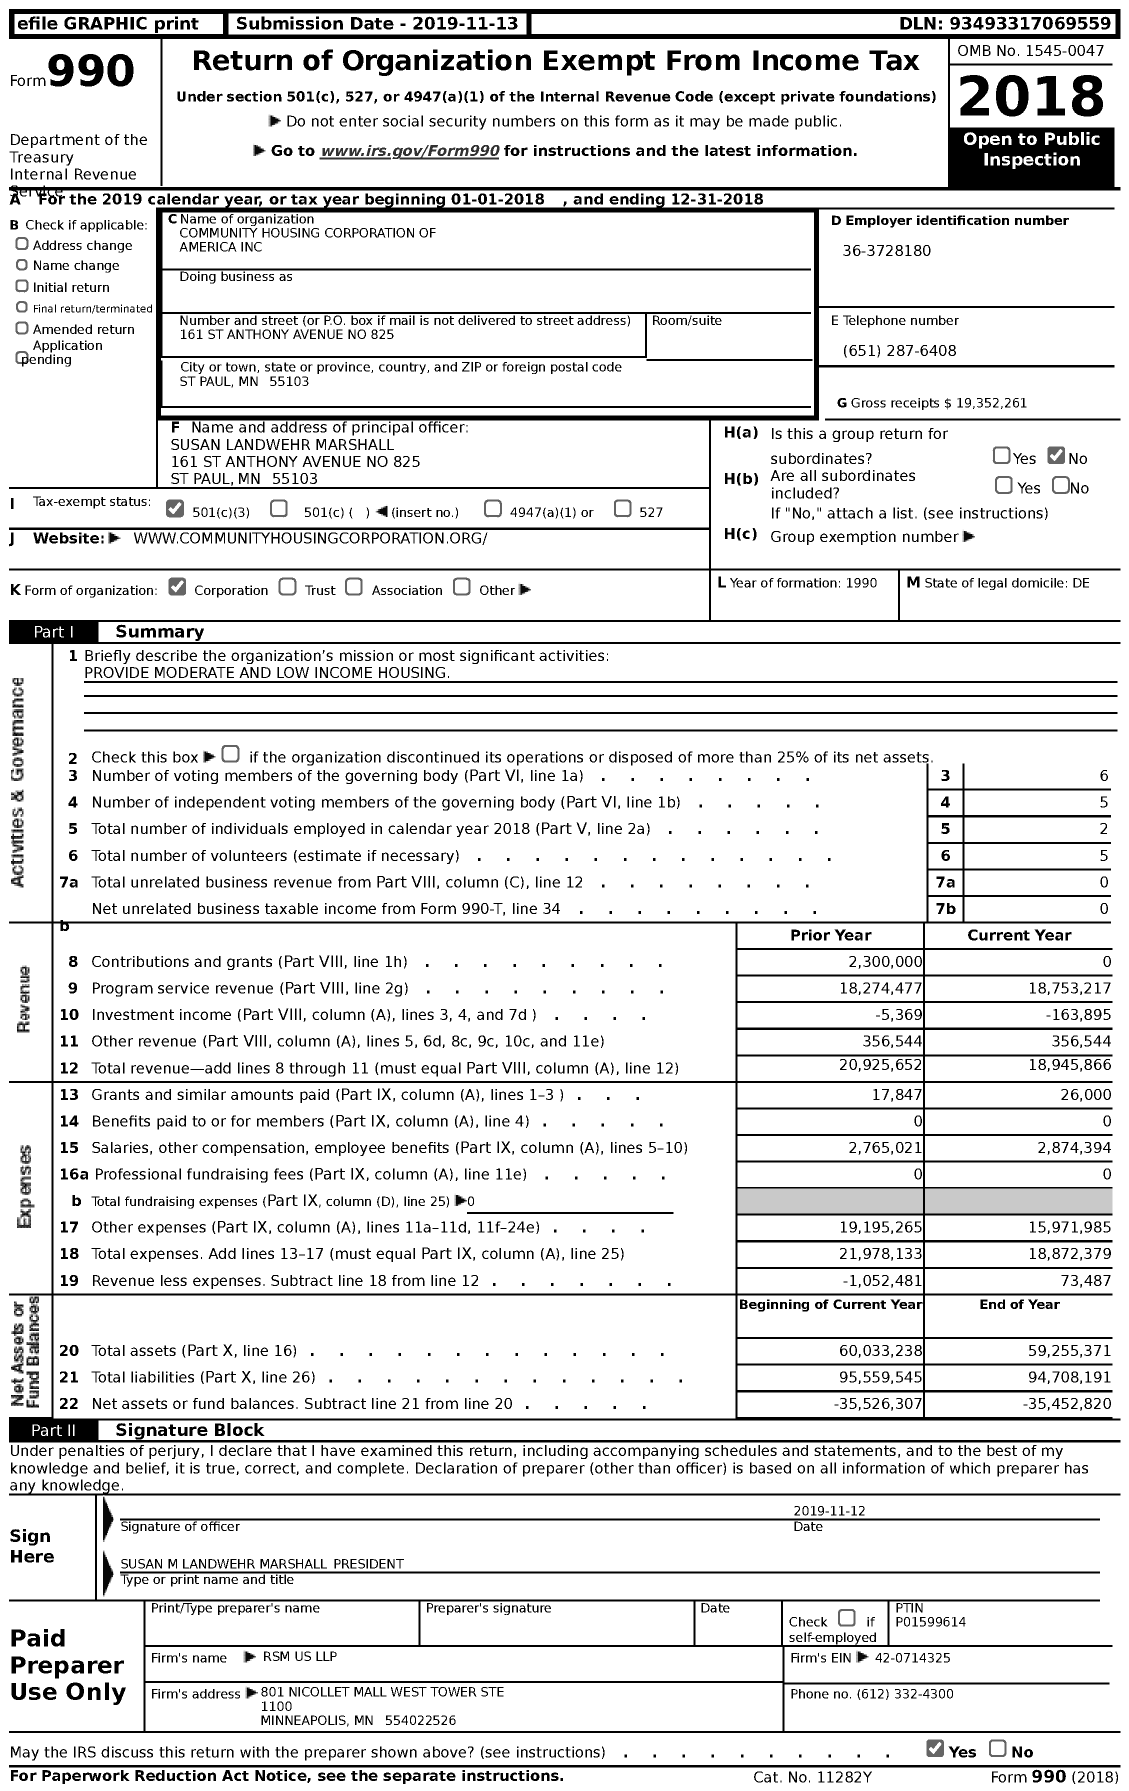 Image of first page of 2018 Form 990 for Community Housing Corporation of America (CHC)